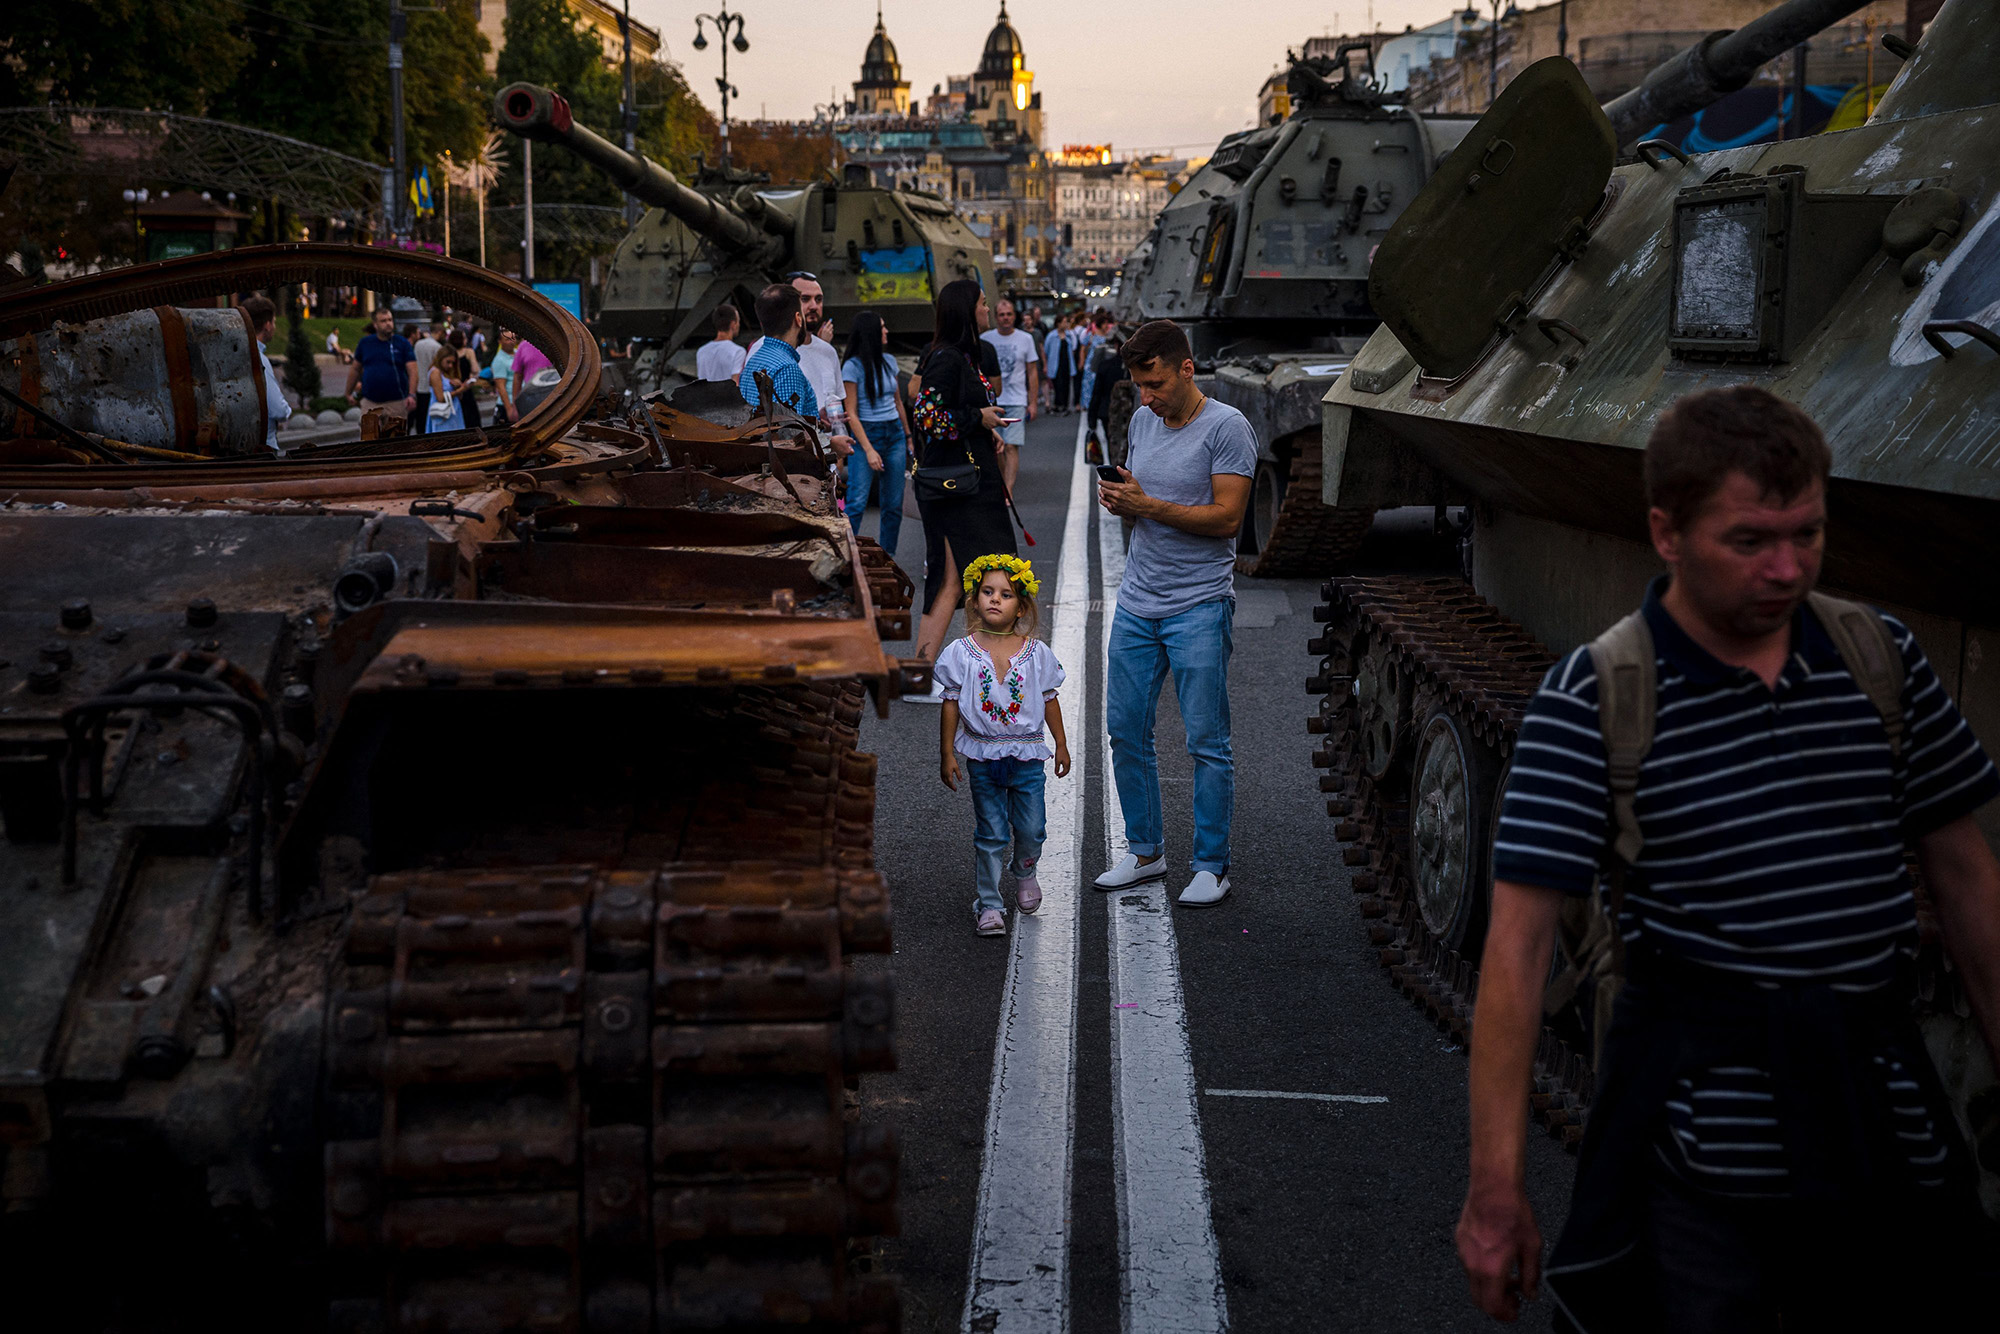 People look at destroyed Russian military equipments in Kyiv on August 23, during an open-air military museum ahead of Ukraine's Independence Day.